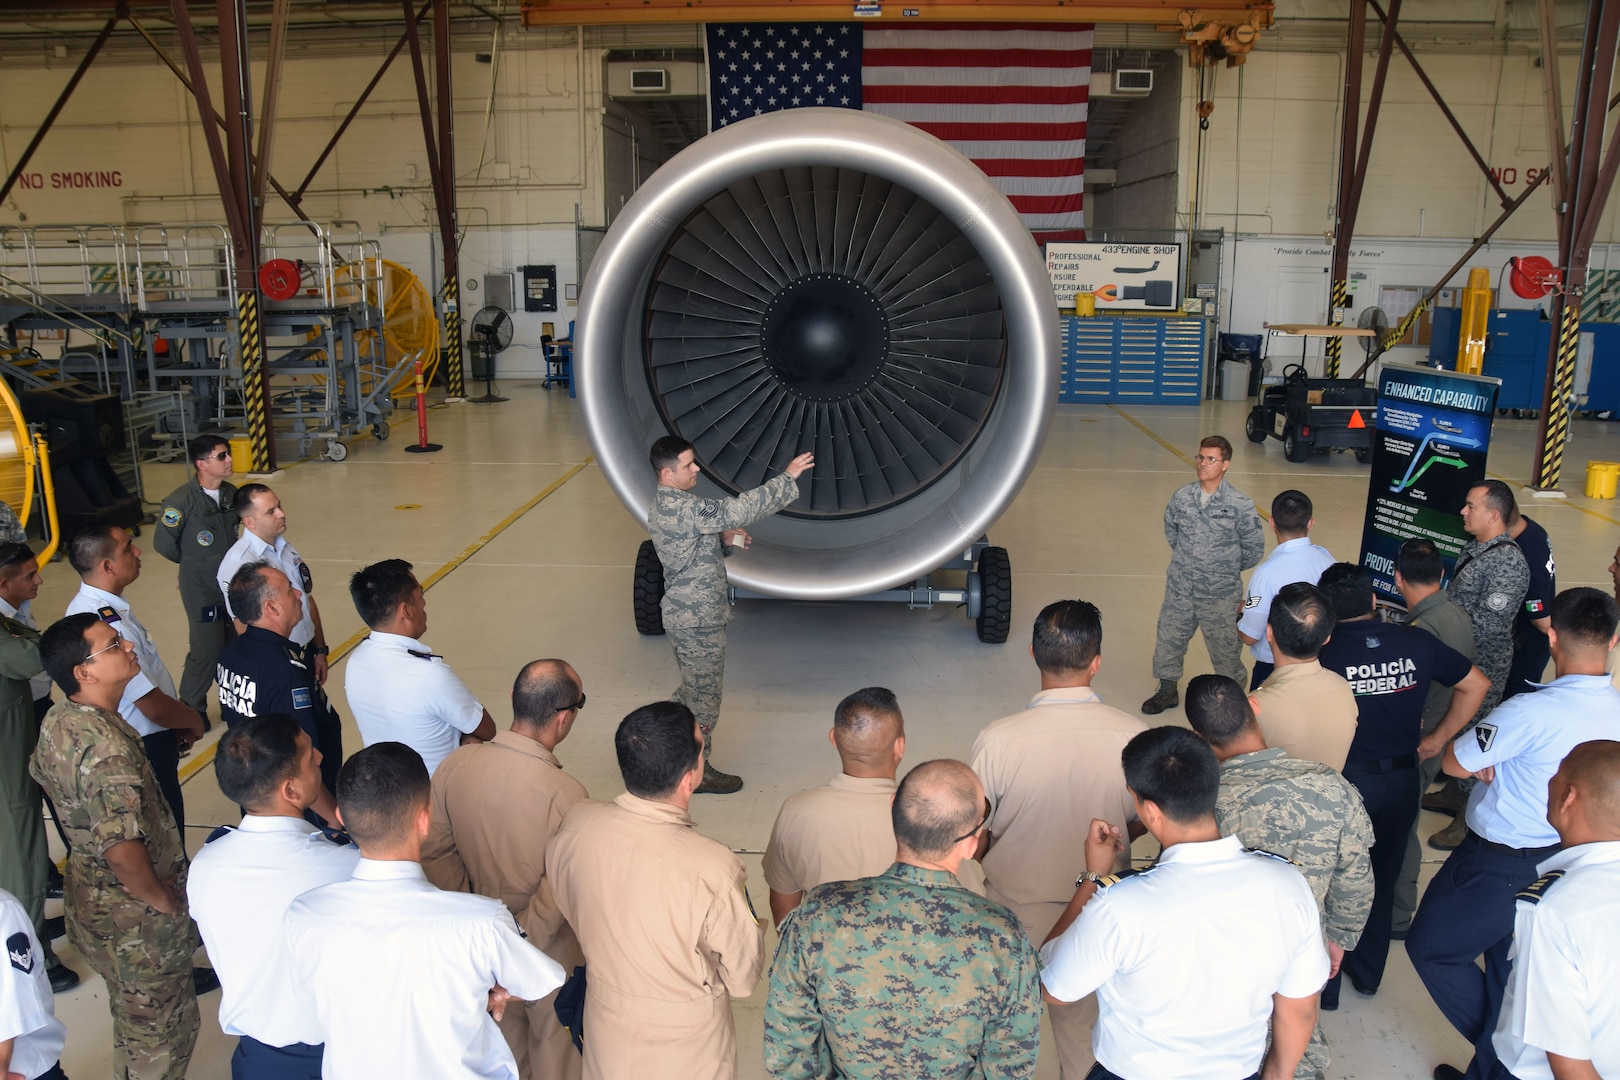 Tech. Sgt. Corey D. Murphy, 433rd Maintenance Squadron aerospace propulsion technician, briefs 40 students from the Inter-American Air Forces Academy ,on the new GE CF6-80C2 turbofan engine that the C-5M Super Galaxy aircraft uses July 18 at Joint Base San Antonio-Lackland. IAAFA students are from Latin American nations who study courses taught in Spanish in subjects ranging from professional military education, operations and support to aircraft and systems training.